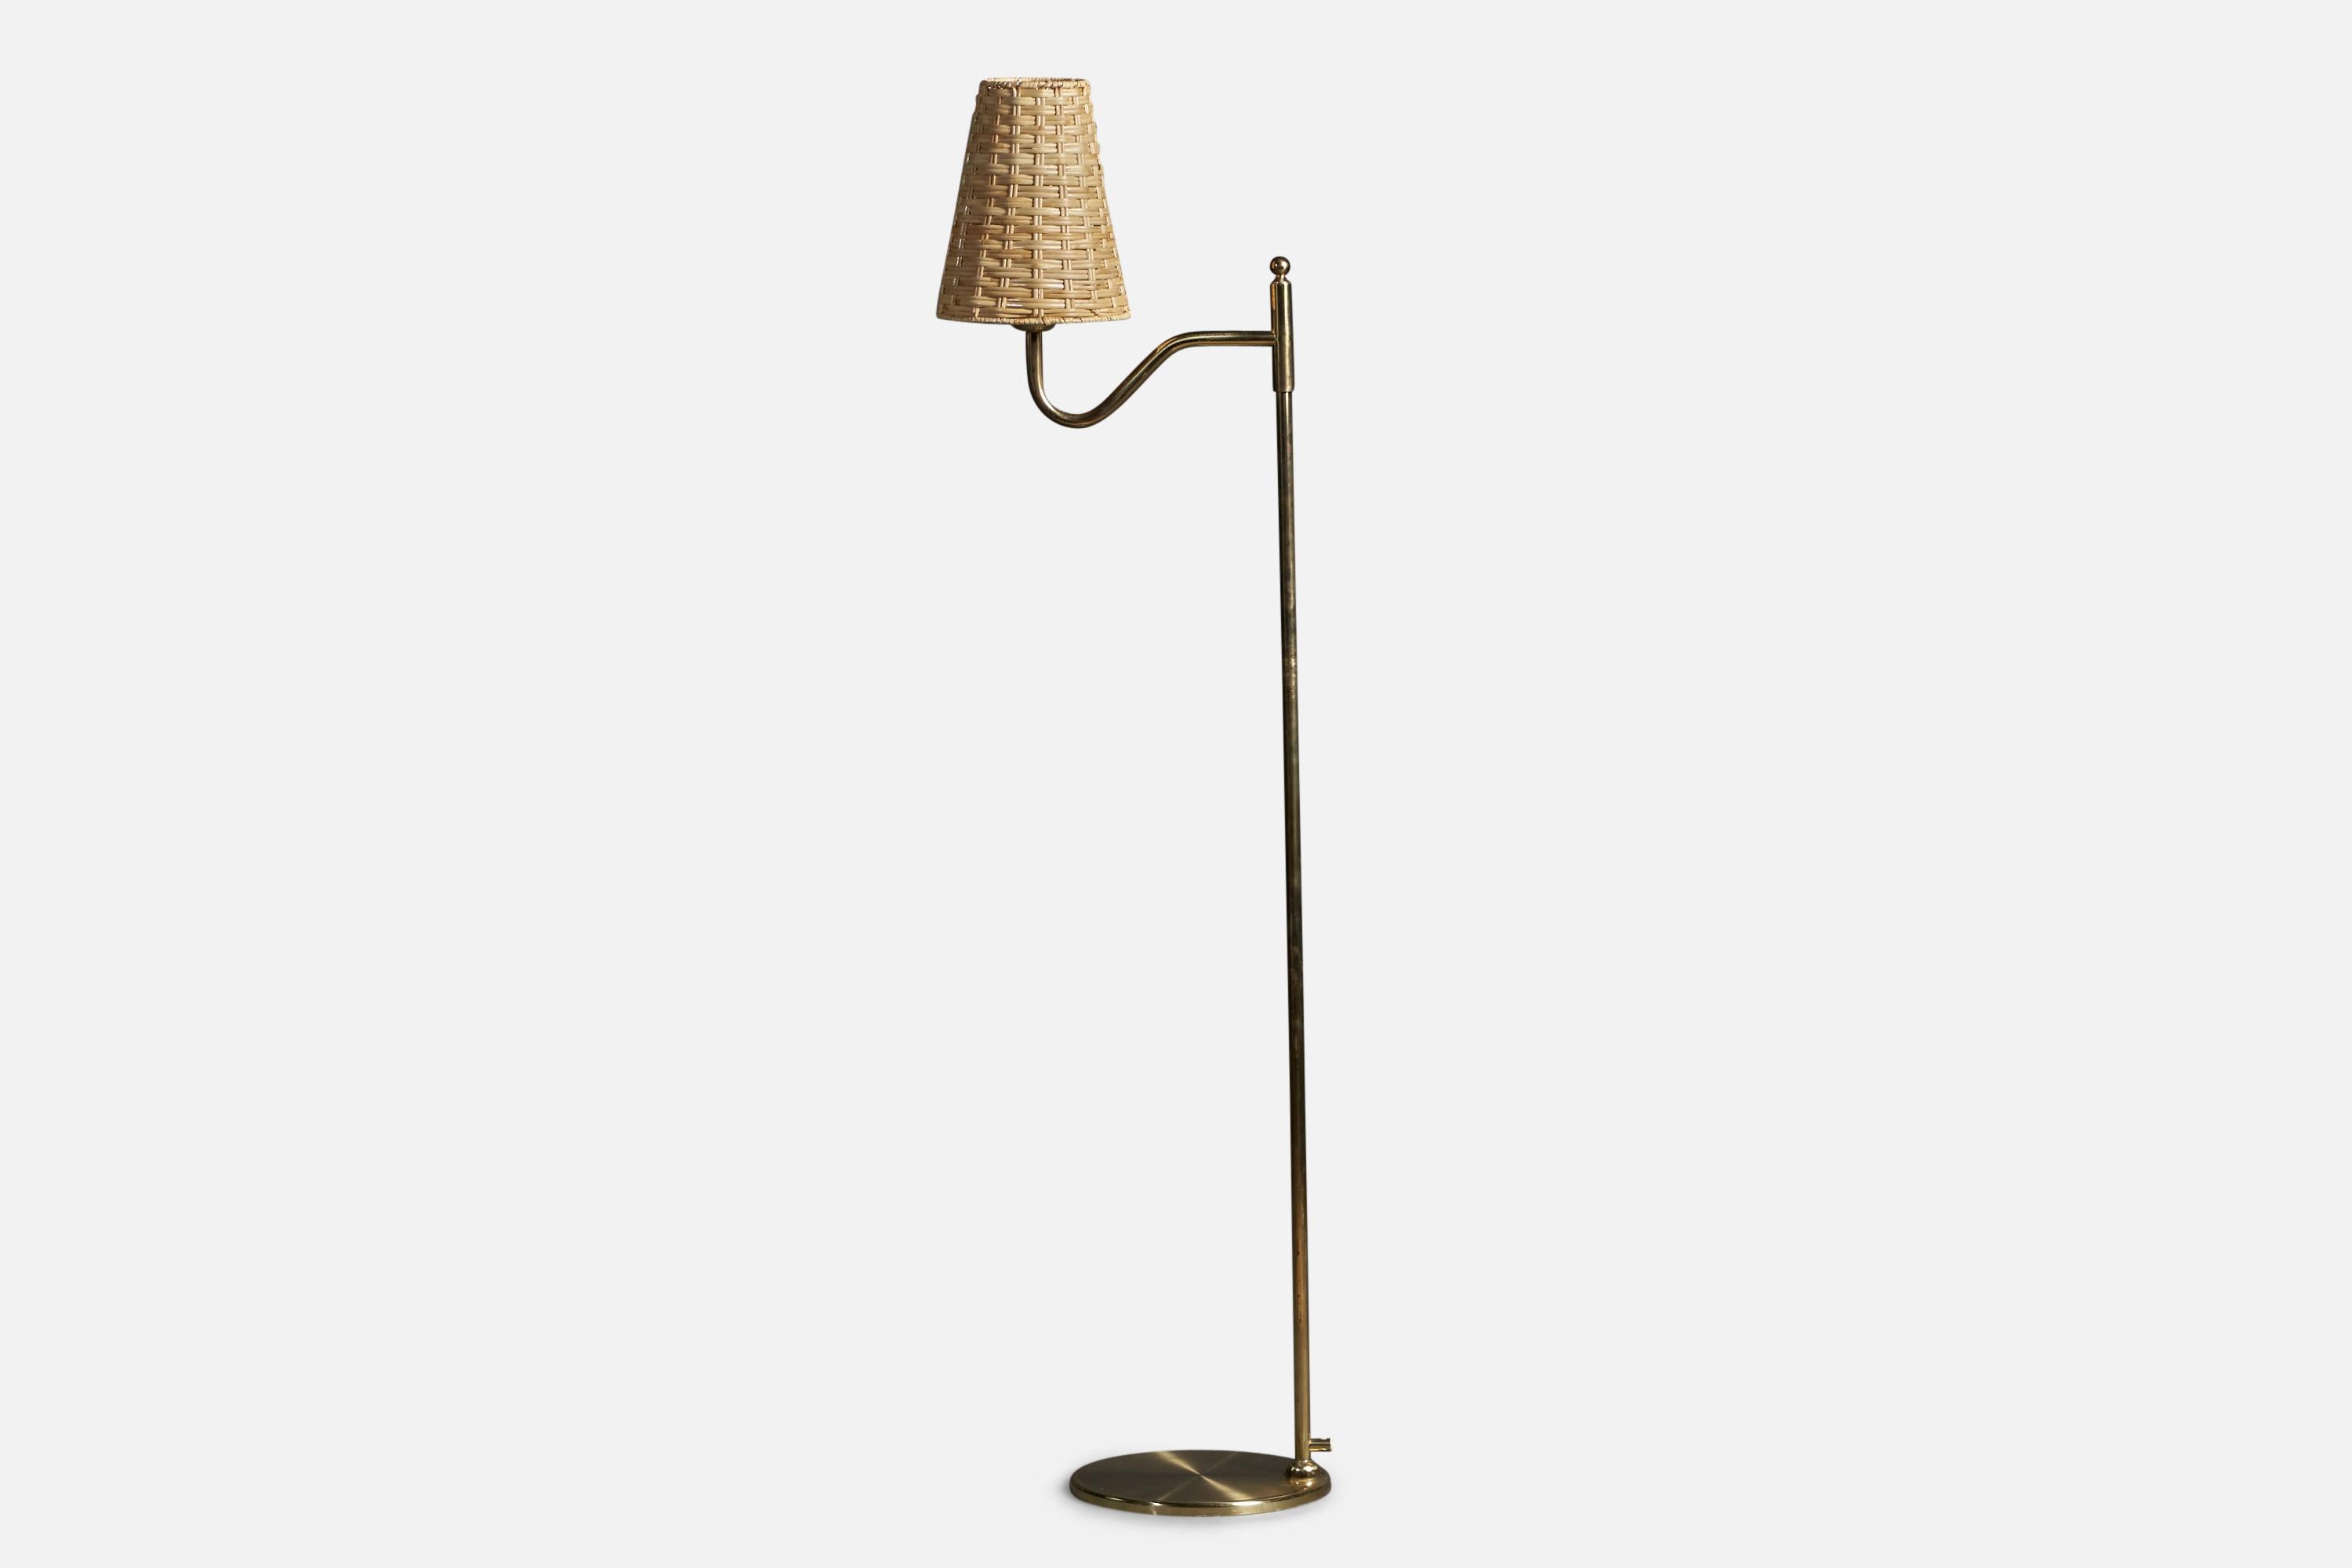 A brass and rattan floor lamp designed and produced by Nya Öia, Sweden, c. 1970s.

Overall Dimensions: 51.75